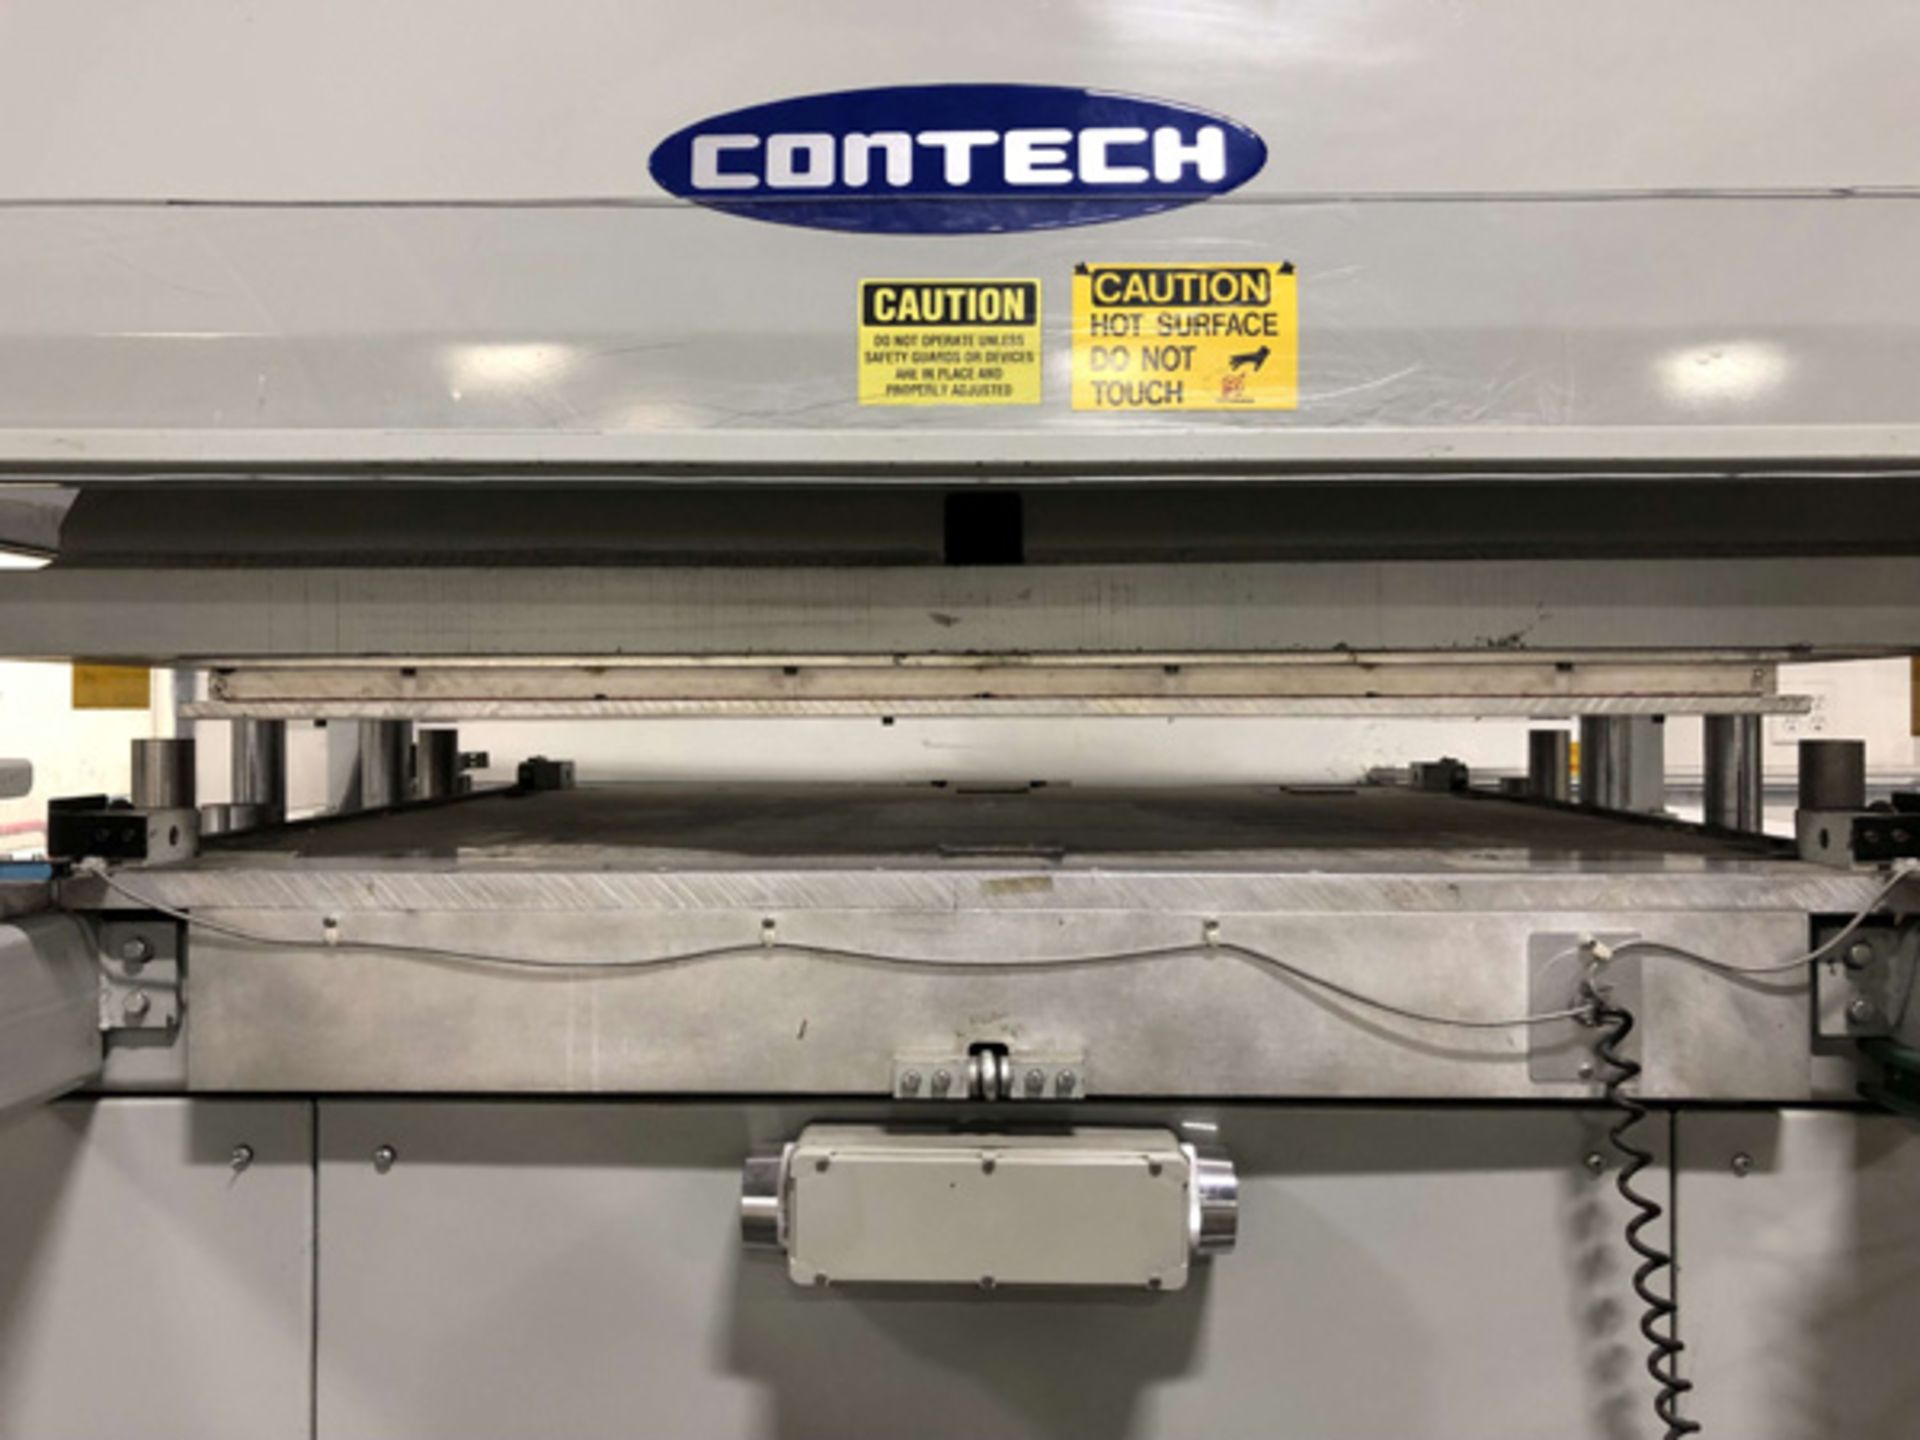 Contech 36" x 48" Ultra Press, Heated Platen: 48" L to R, 36" F to B, Touchscreen PLC Control, - Image 5 of 13